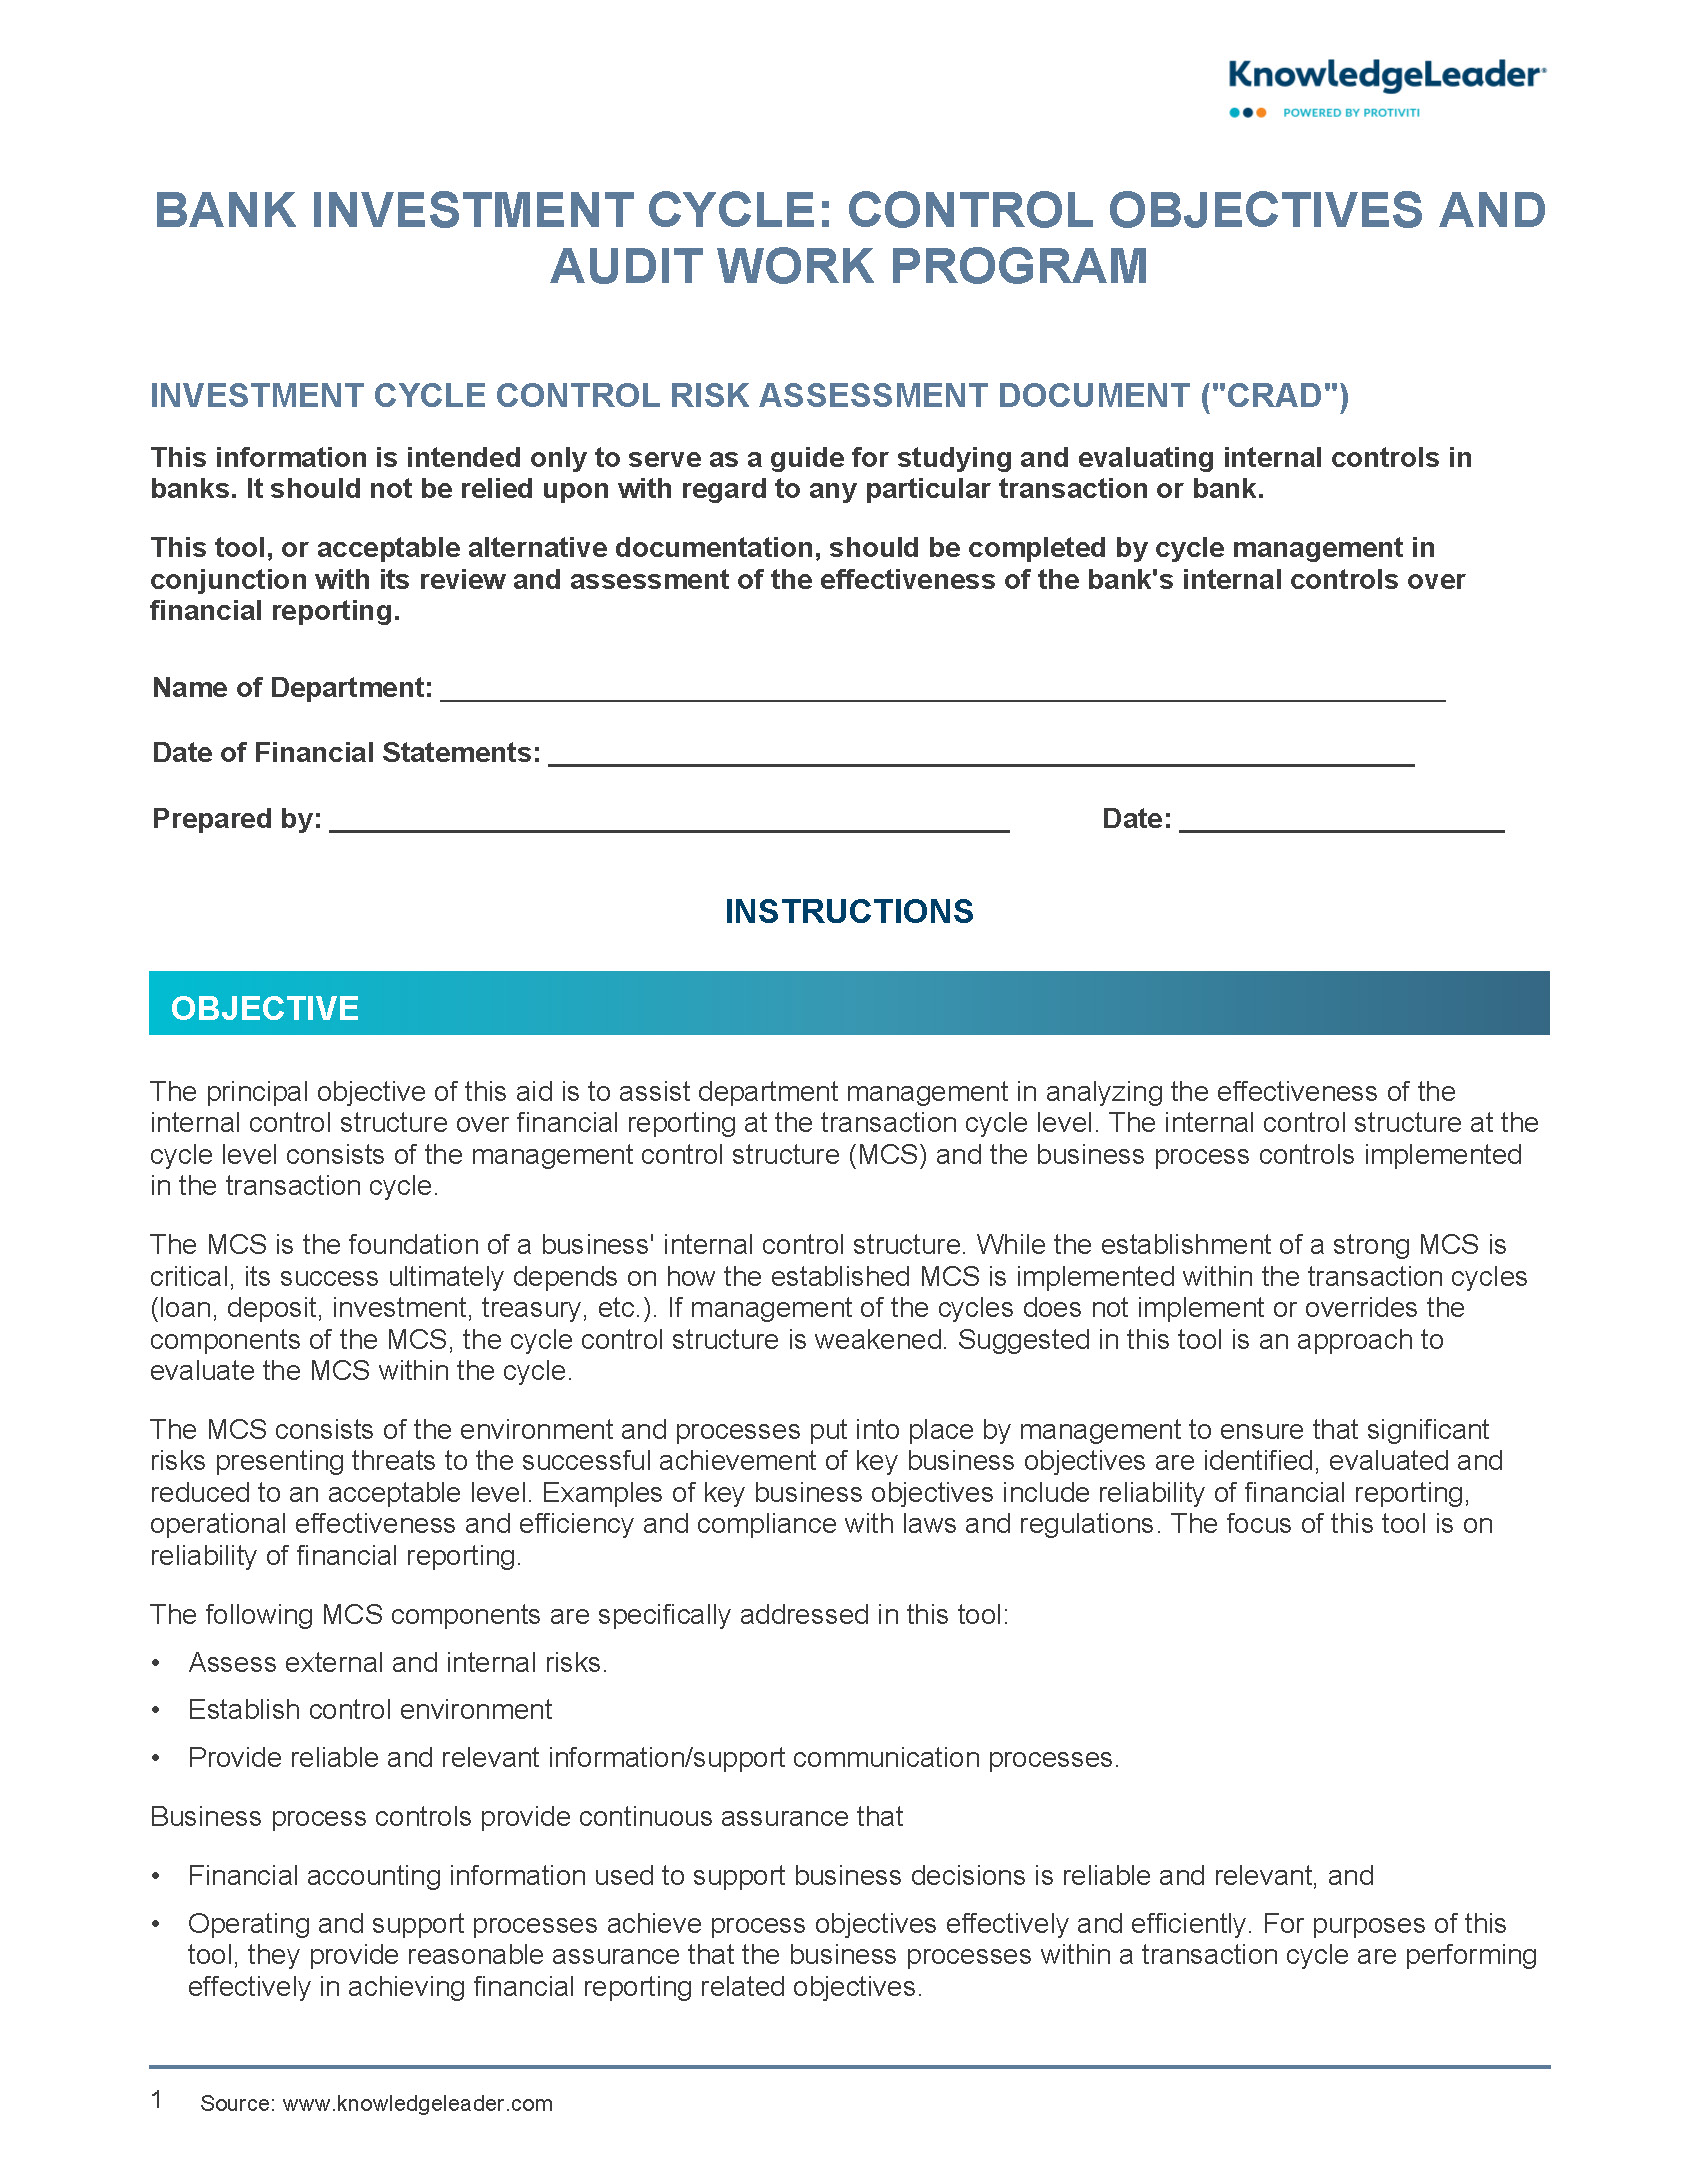 Bank Investment Cycle - Control Objectives and Audit Work Program